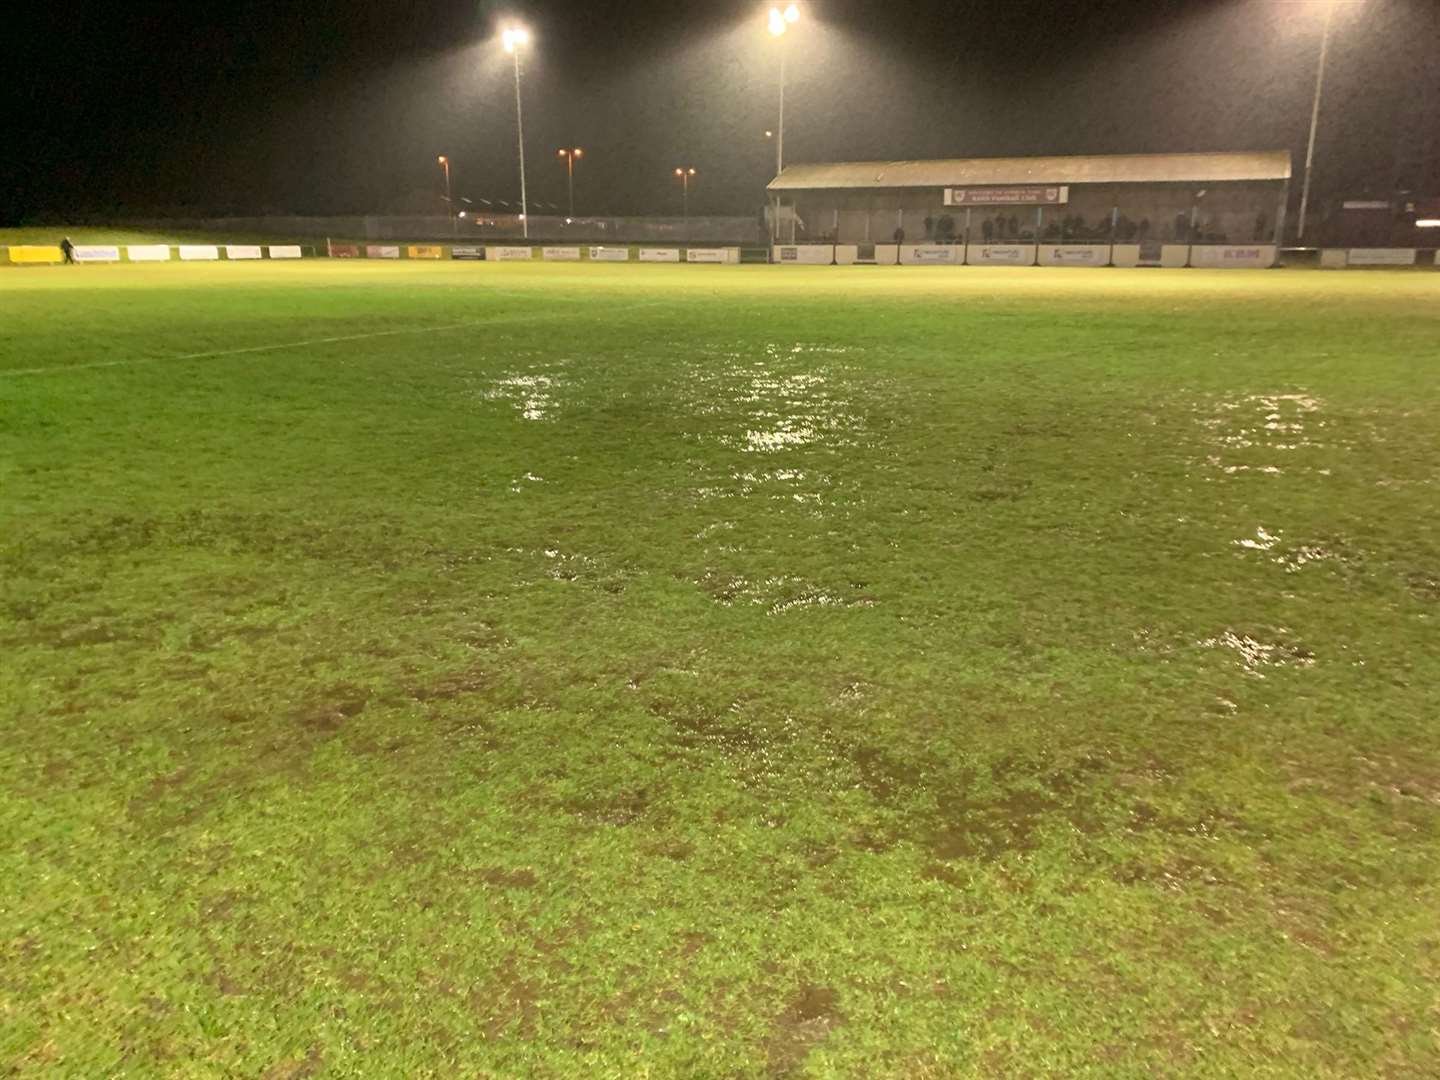 Kynoch Park didn't recover from this week's rainfall. Photo: Daniel Forsyth